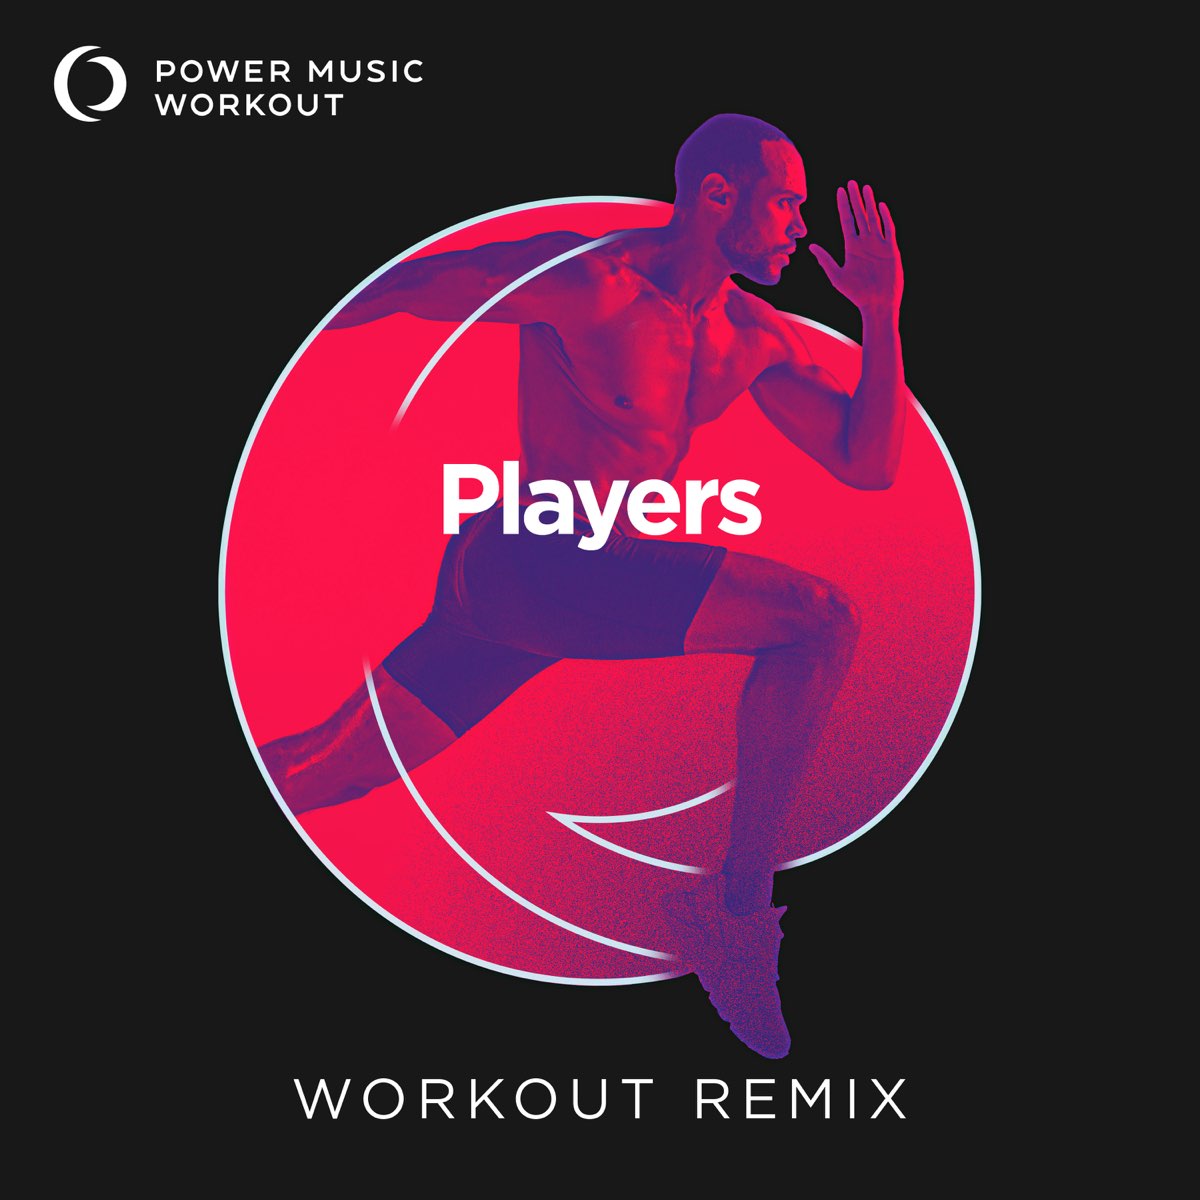 Best of 35 Top Hits Workout Mixes (Unmixed Workout Music Ideal for Gym,  Jogging, Running, Cycling, Cardio and Fitness) - Album by Power Music  Workout - Apple Music